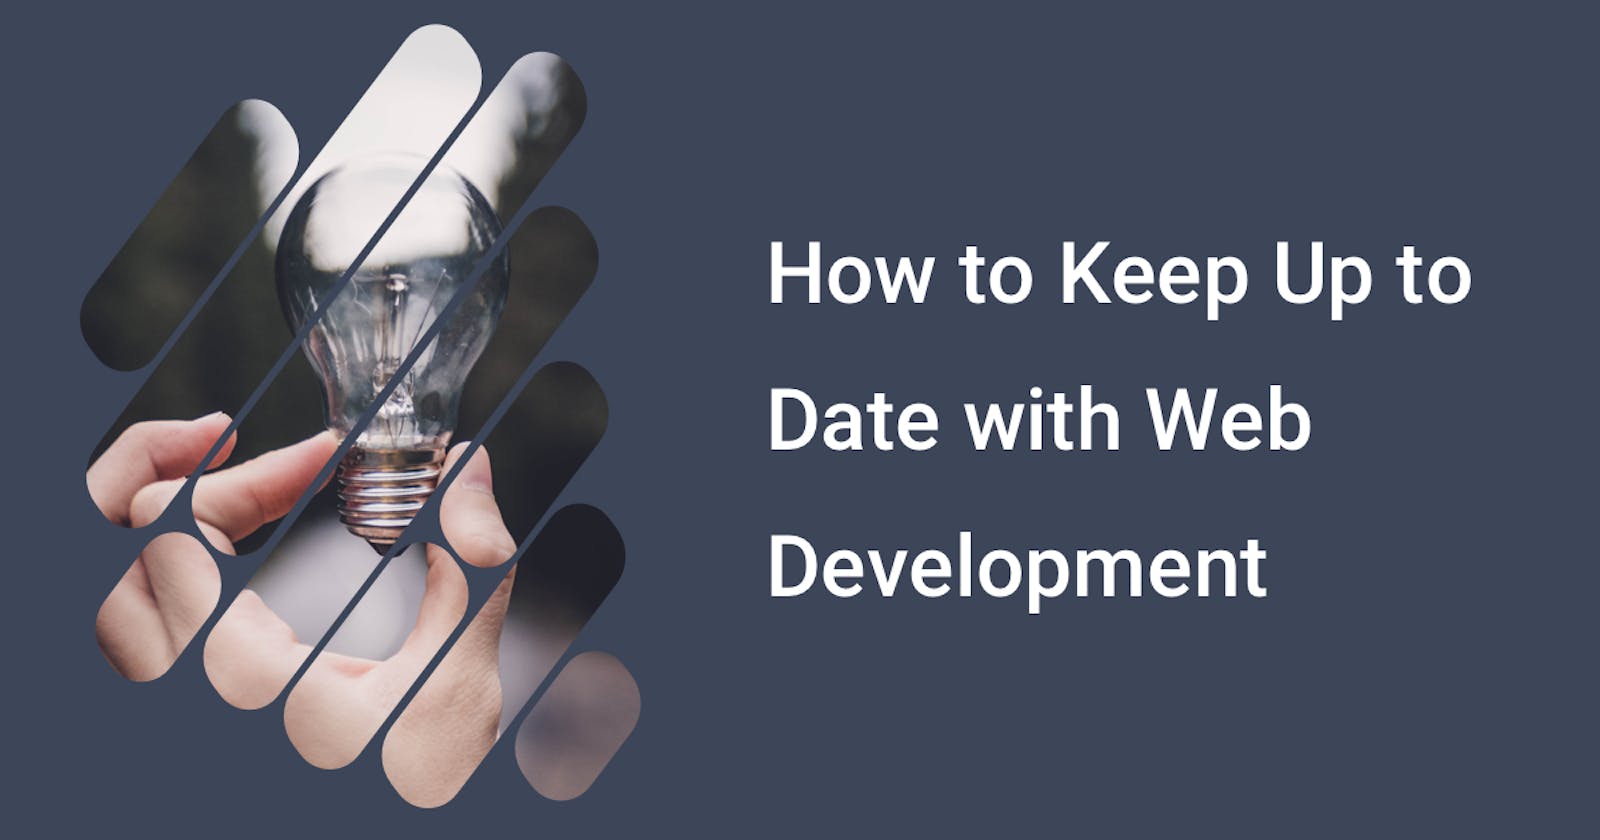 How to Keep Up to Date with Web Development